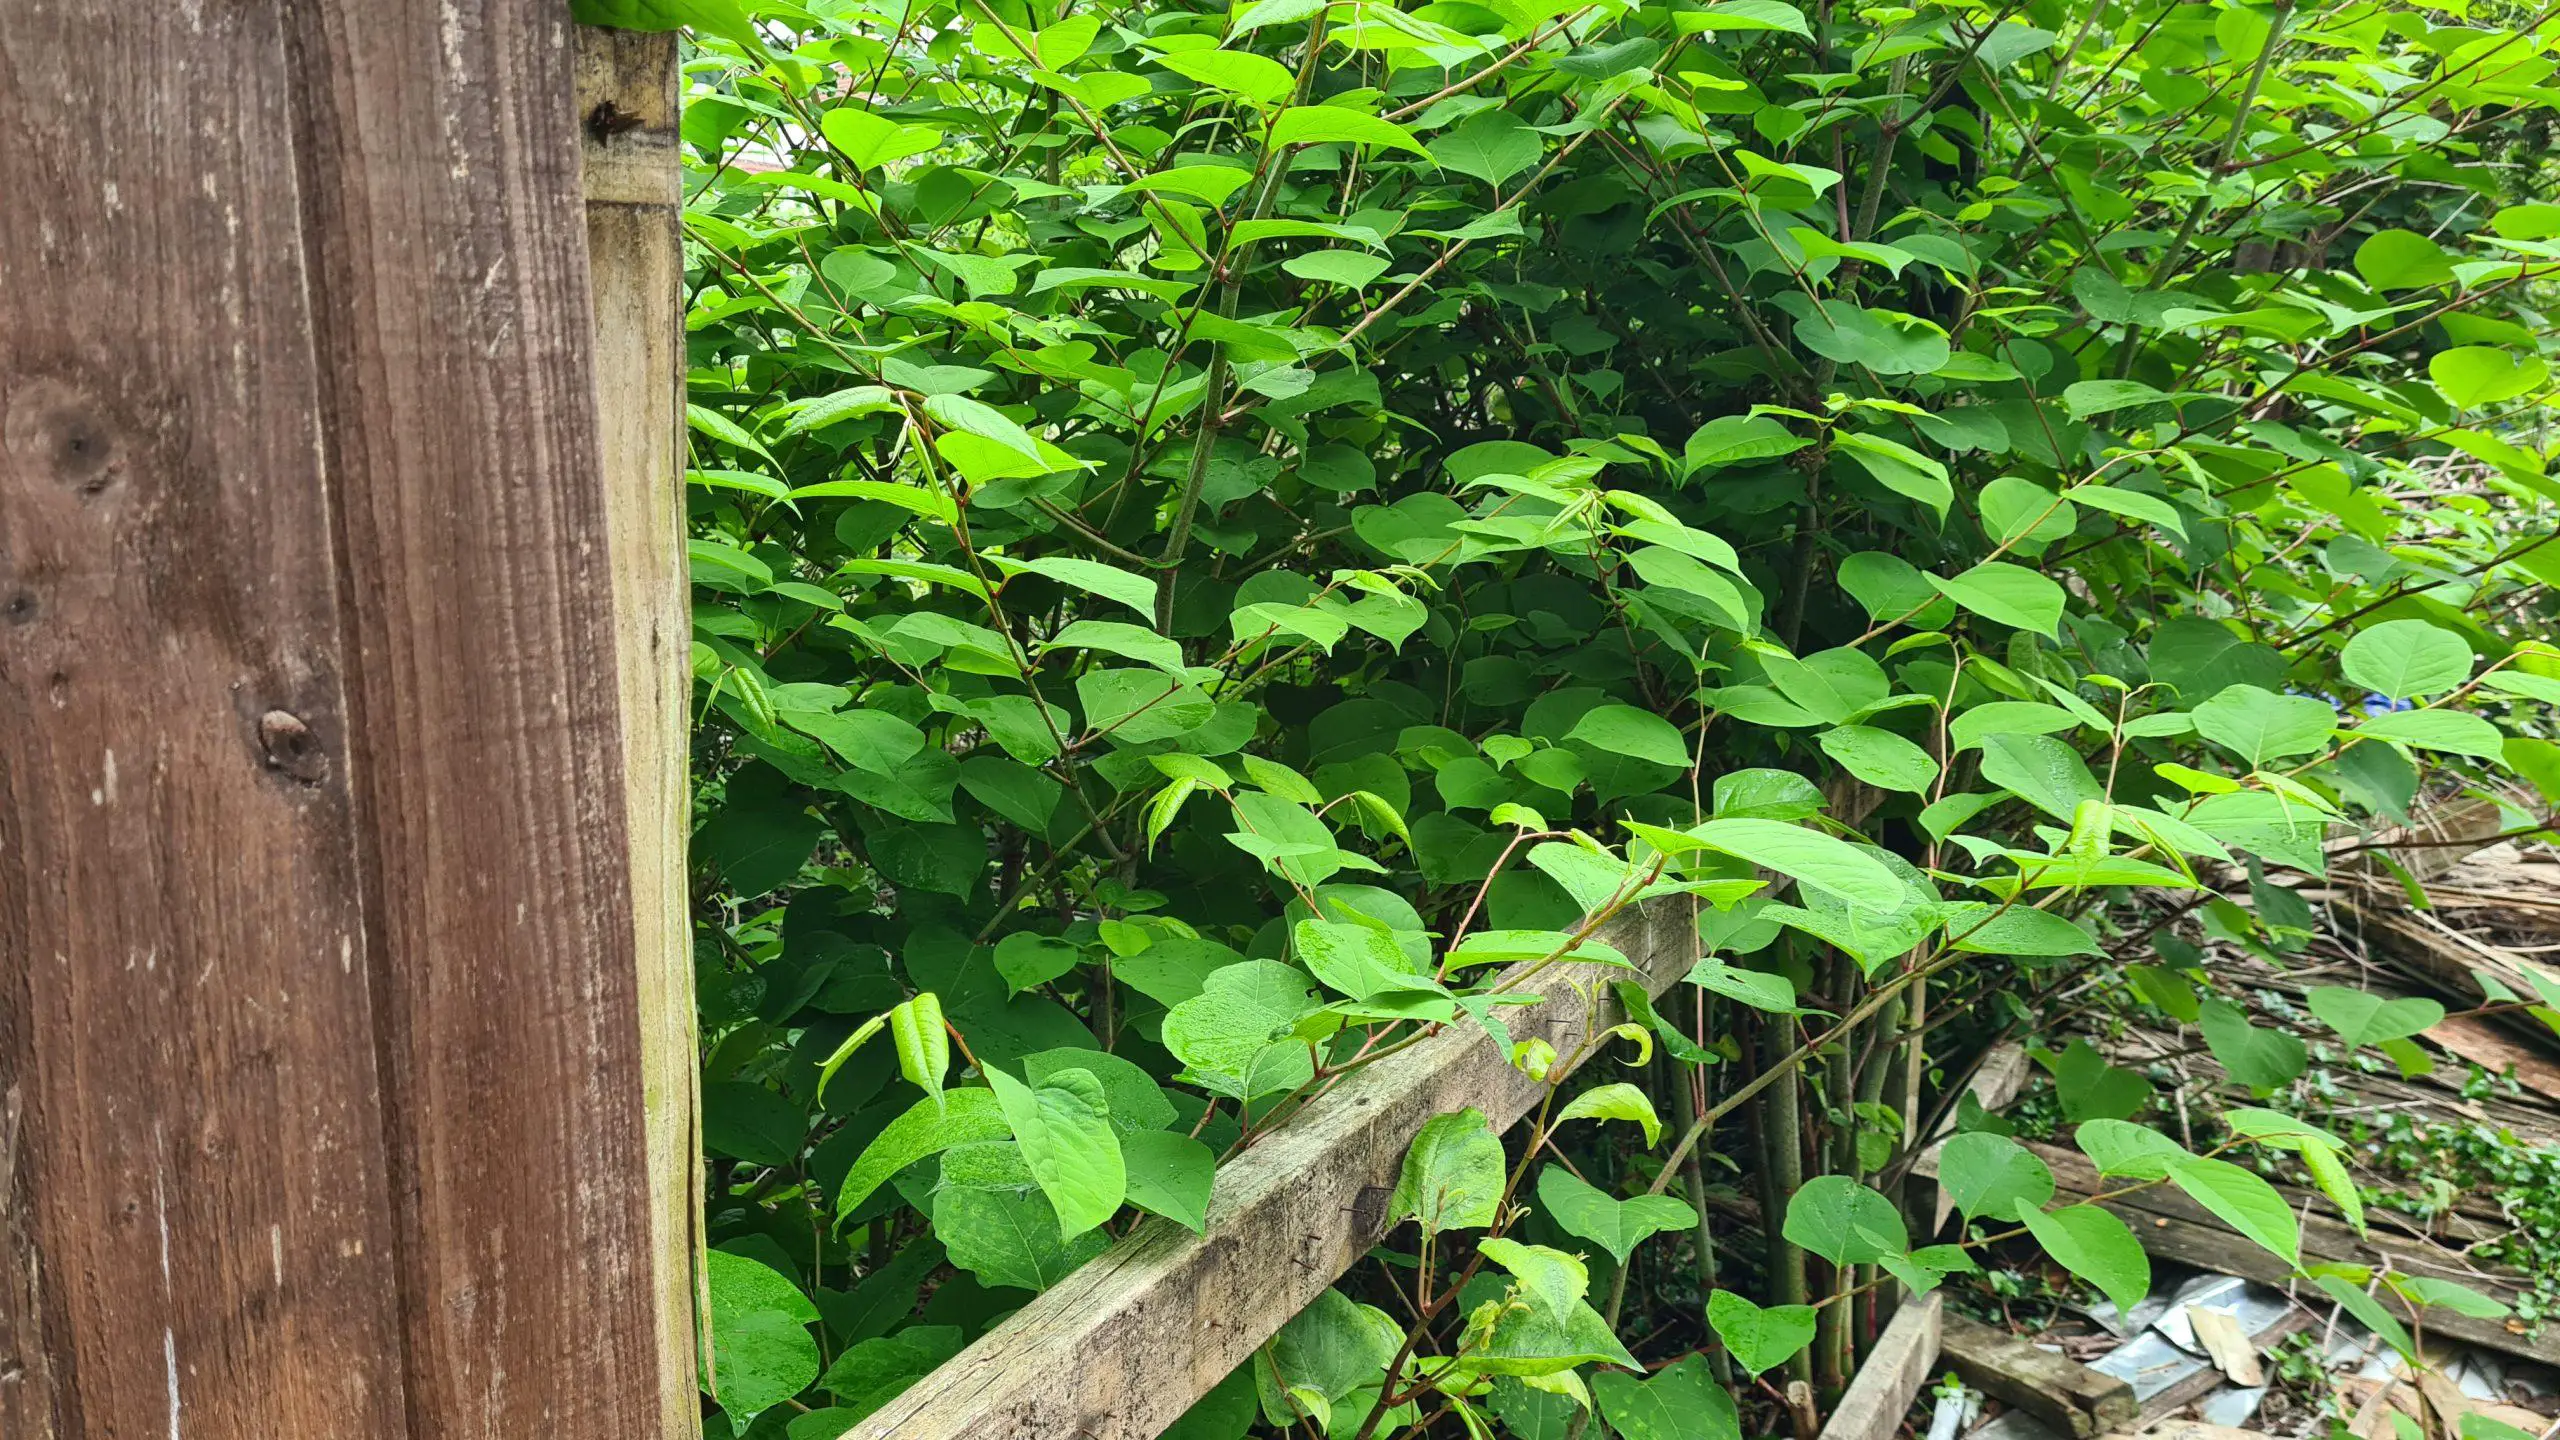 Damage caused to a fence from the aggressive growth of Japanese knotweed